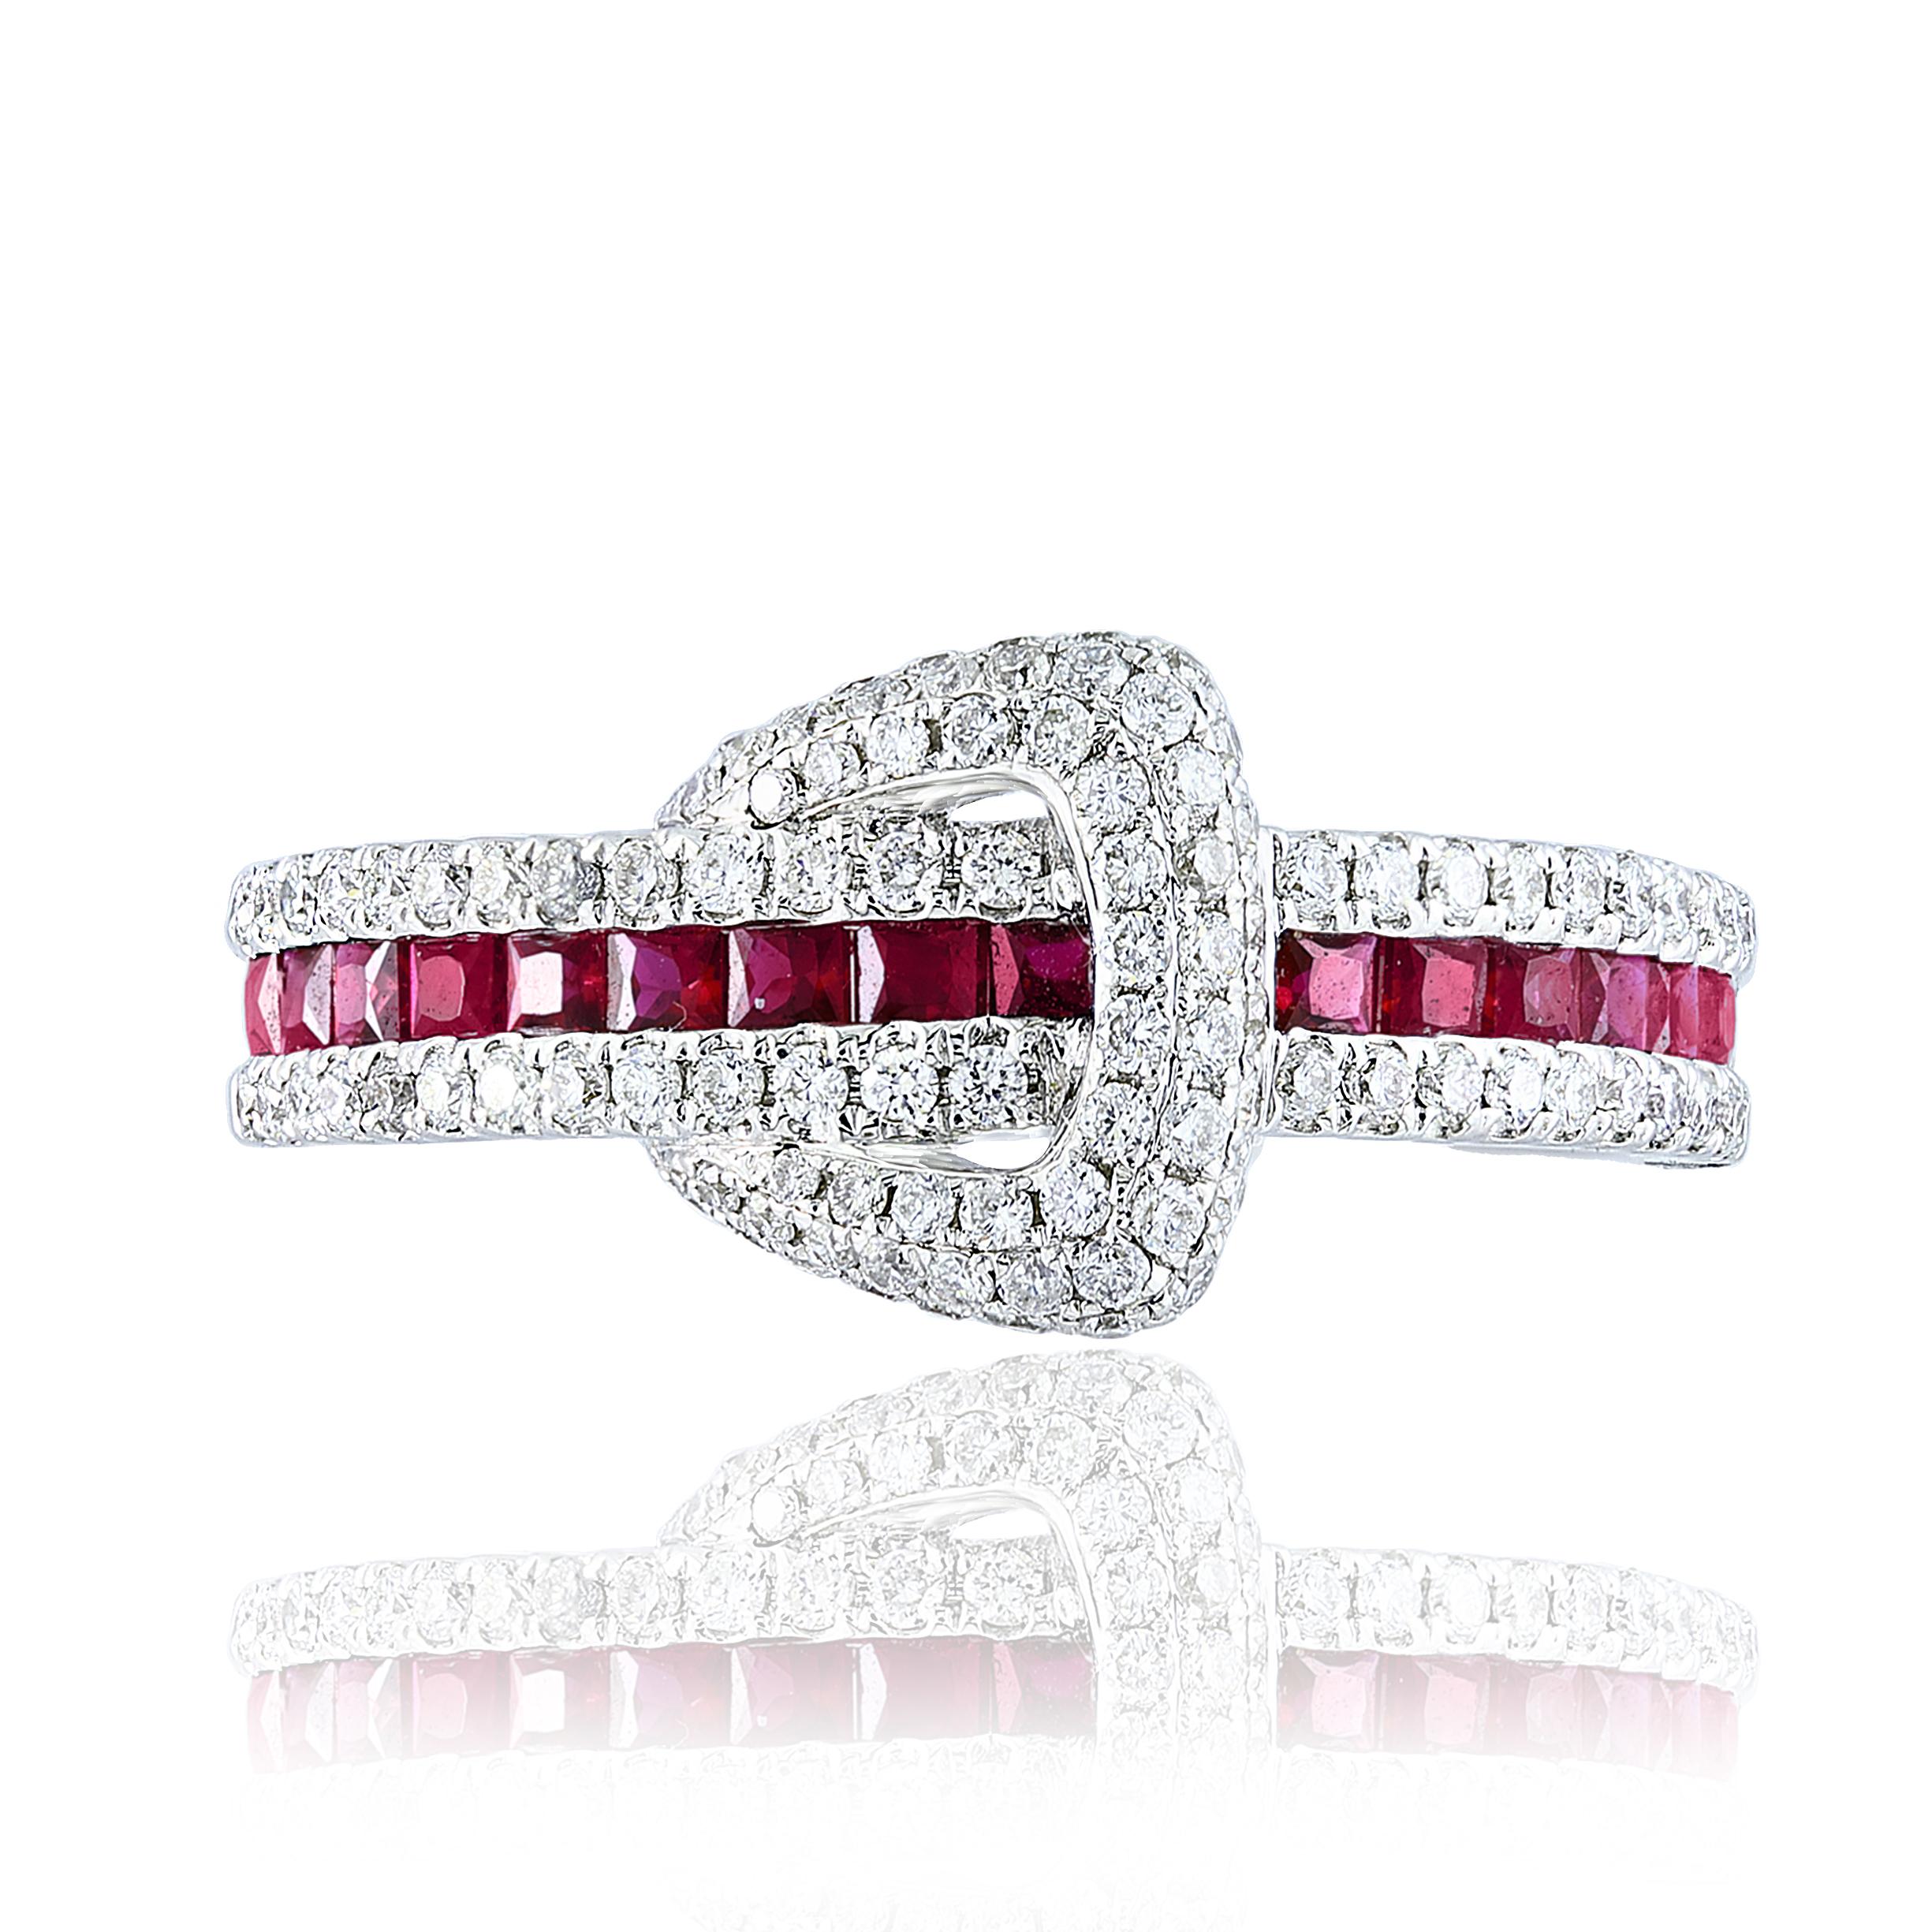 Handcrafted to perfection; this elegant band ring showcases brilliant cut diamonds weighing 0.47 carats total, set in-between princess cut rubies weighing 0.59 carats total. Made in polished 18k white gold.

Size 6.5 US (Sizable). 
All diamonds are